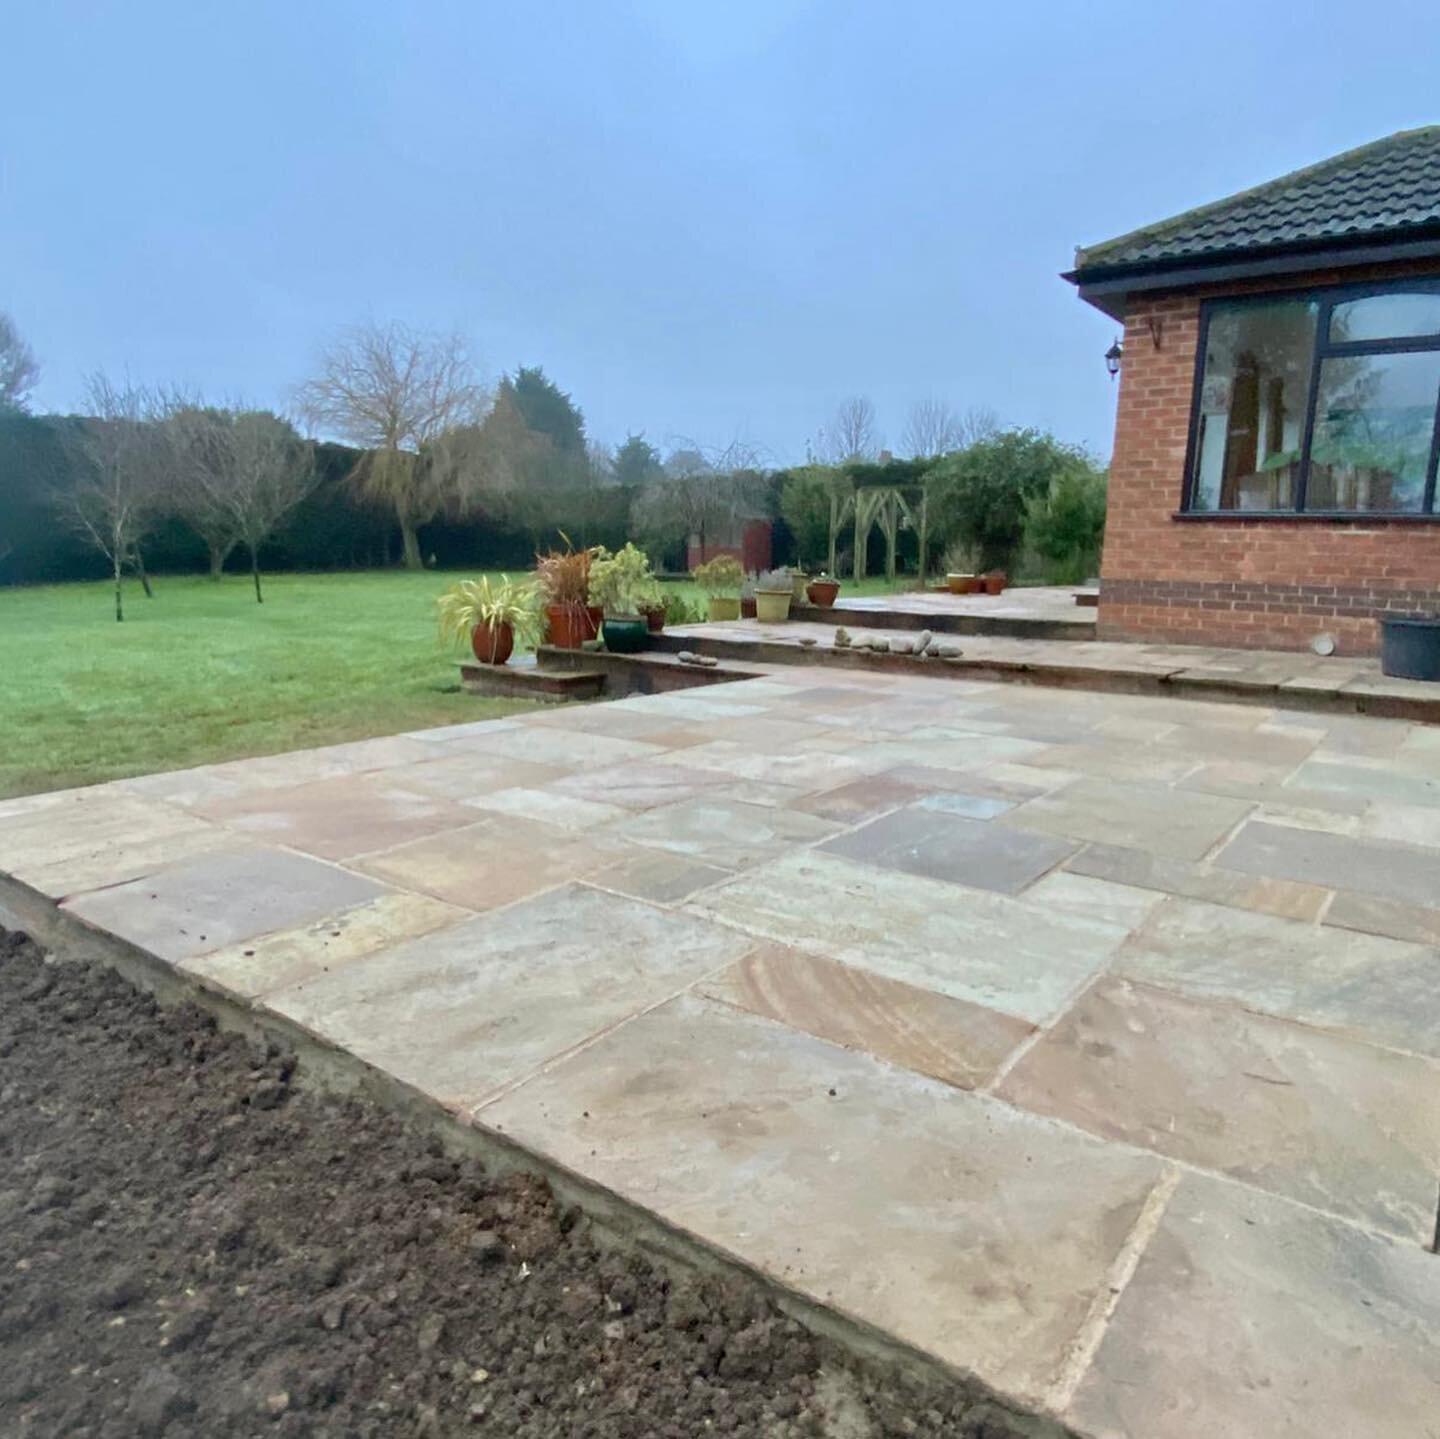 Well done to the team a smart brick raised patio extension with Fossil Mint Indian Sandstone! #indiansandstone #patiodesign #gardendesign #landscapedesign #happyclients #supportsmallbusiness #patioideas #patio #bespokelandscapingco 

To have your gar